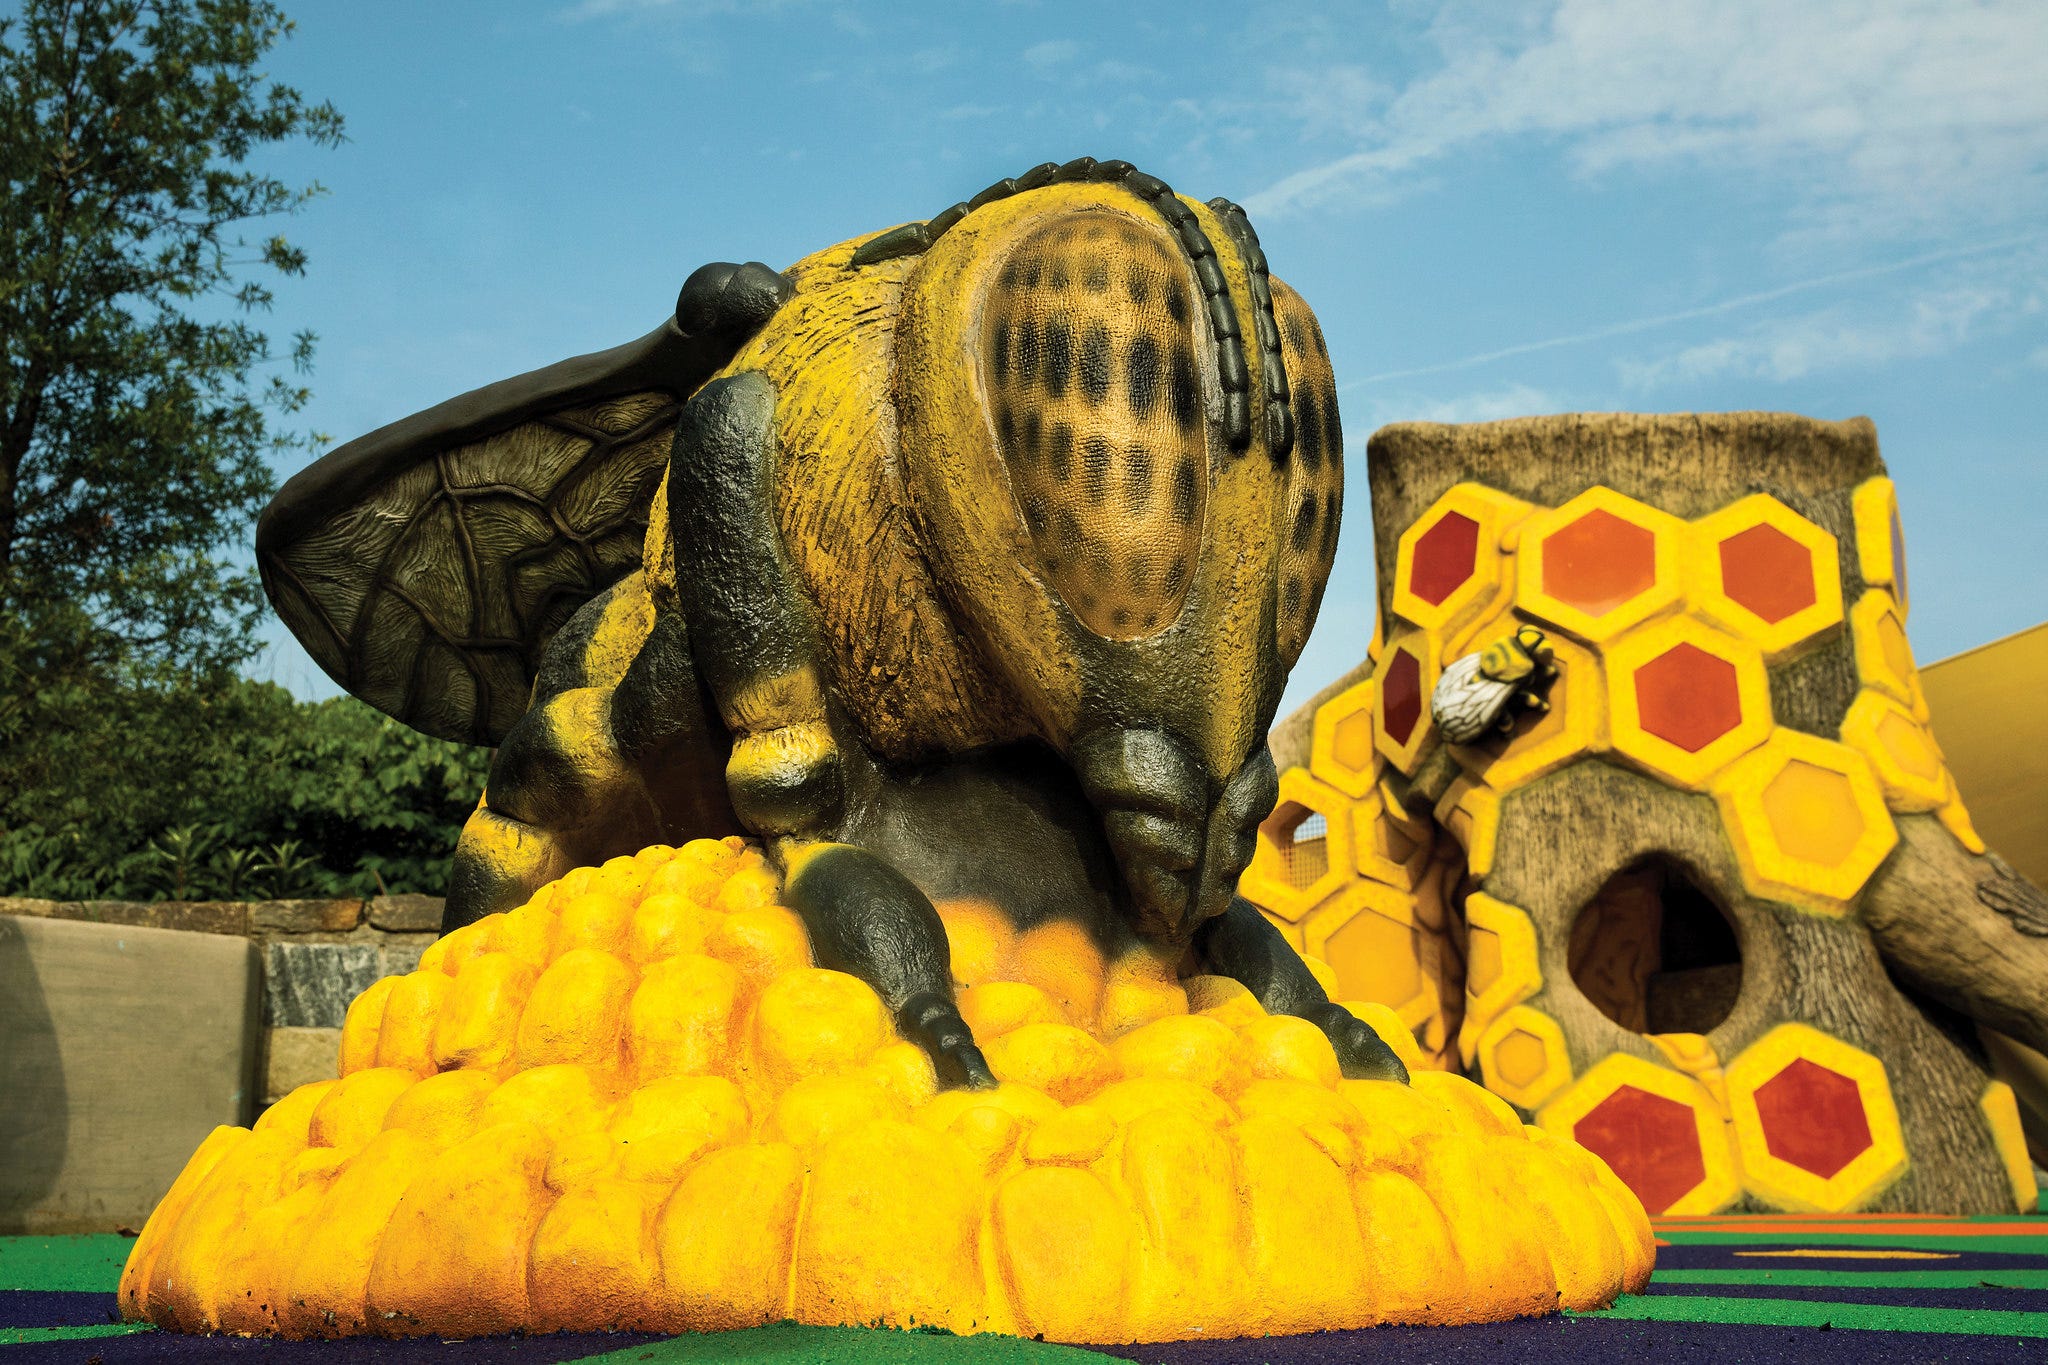 Giant bee scultpure at the Smithsonian National Zoo playground by GameTime